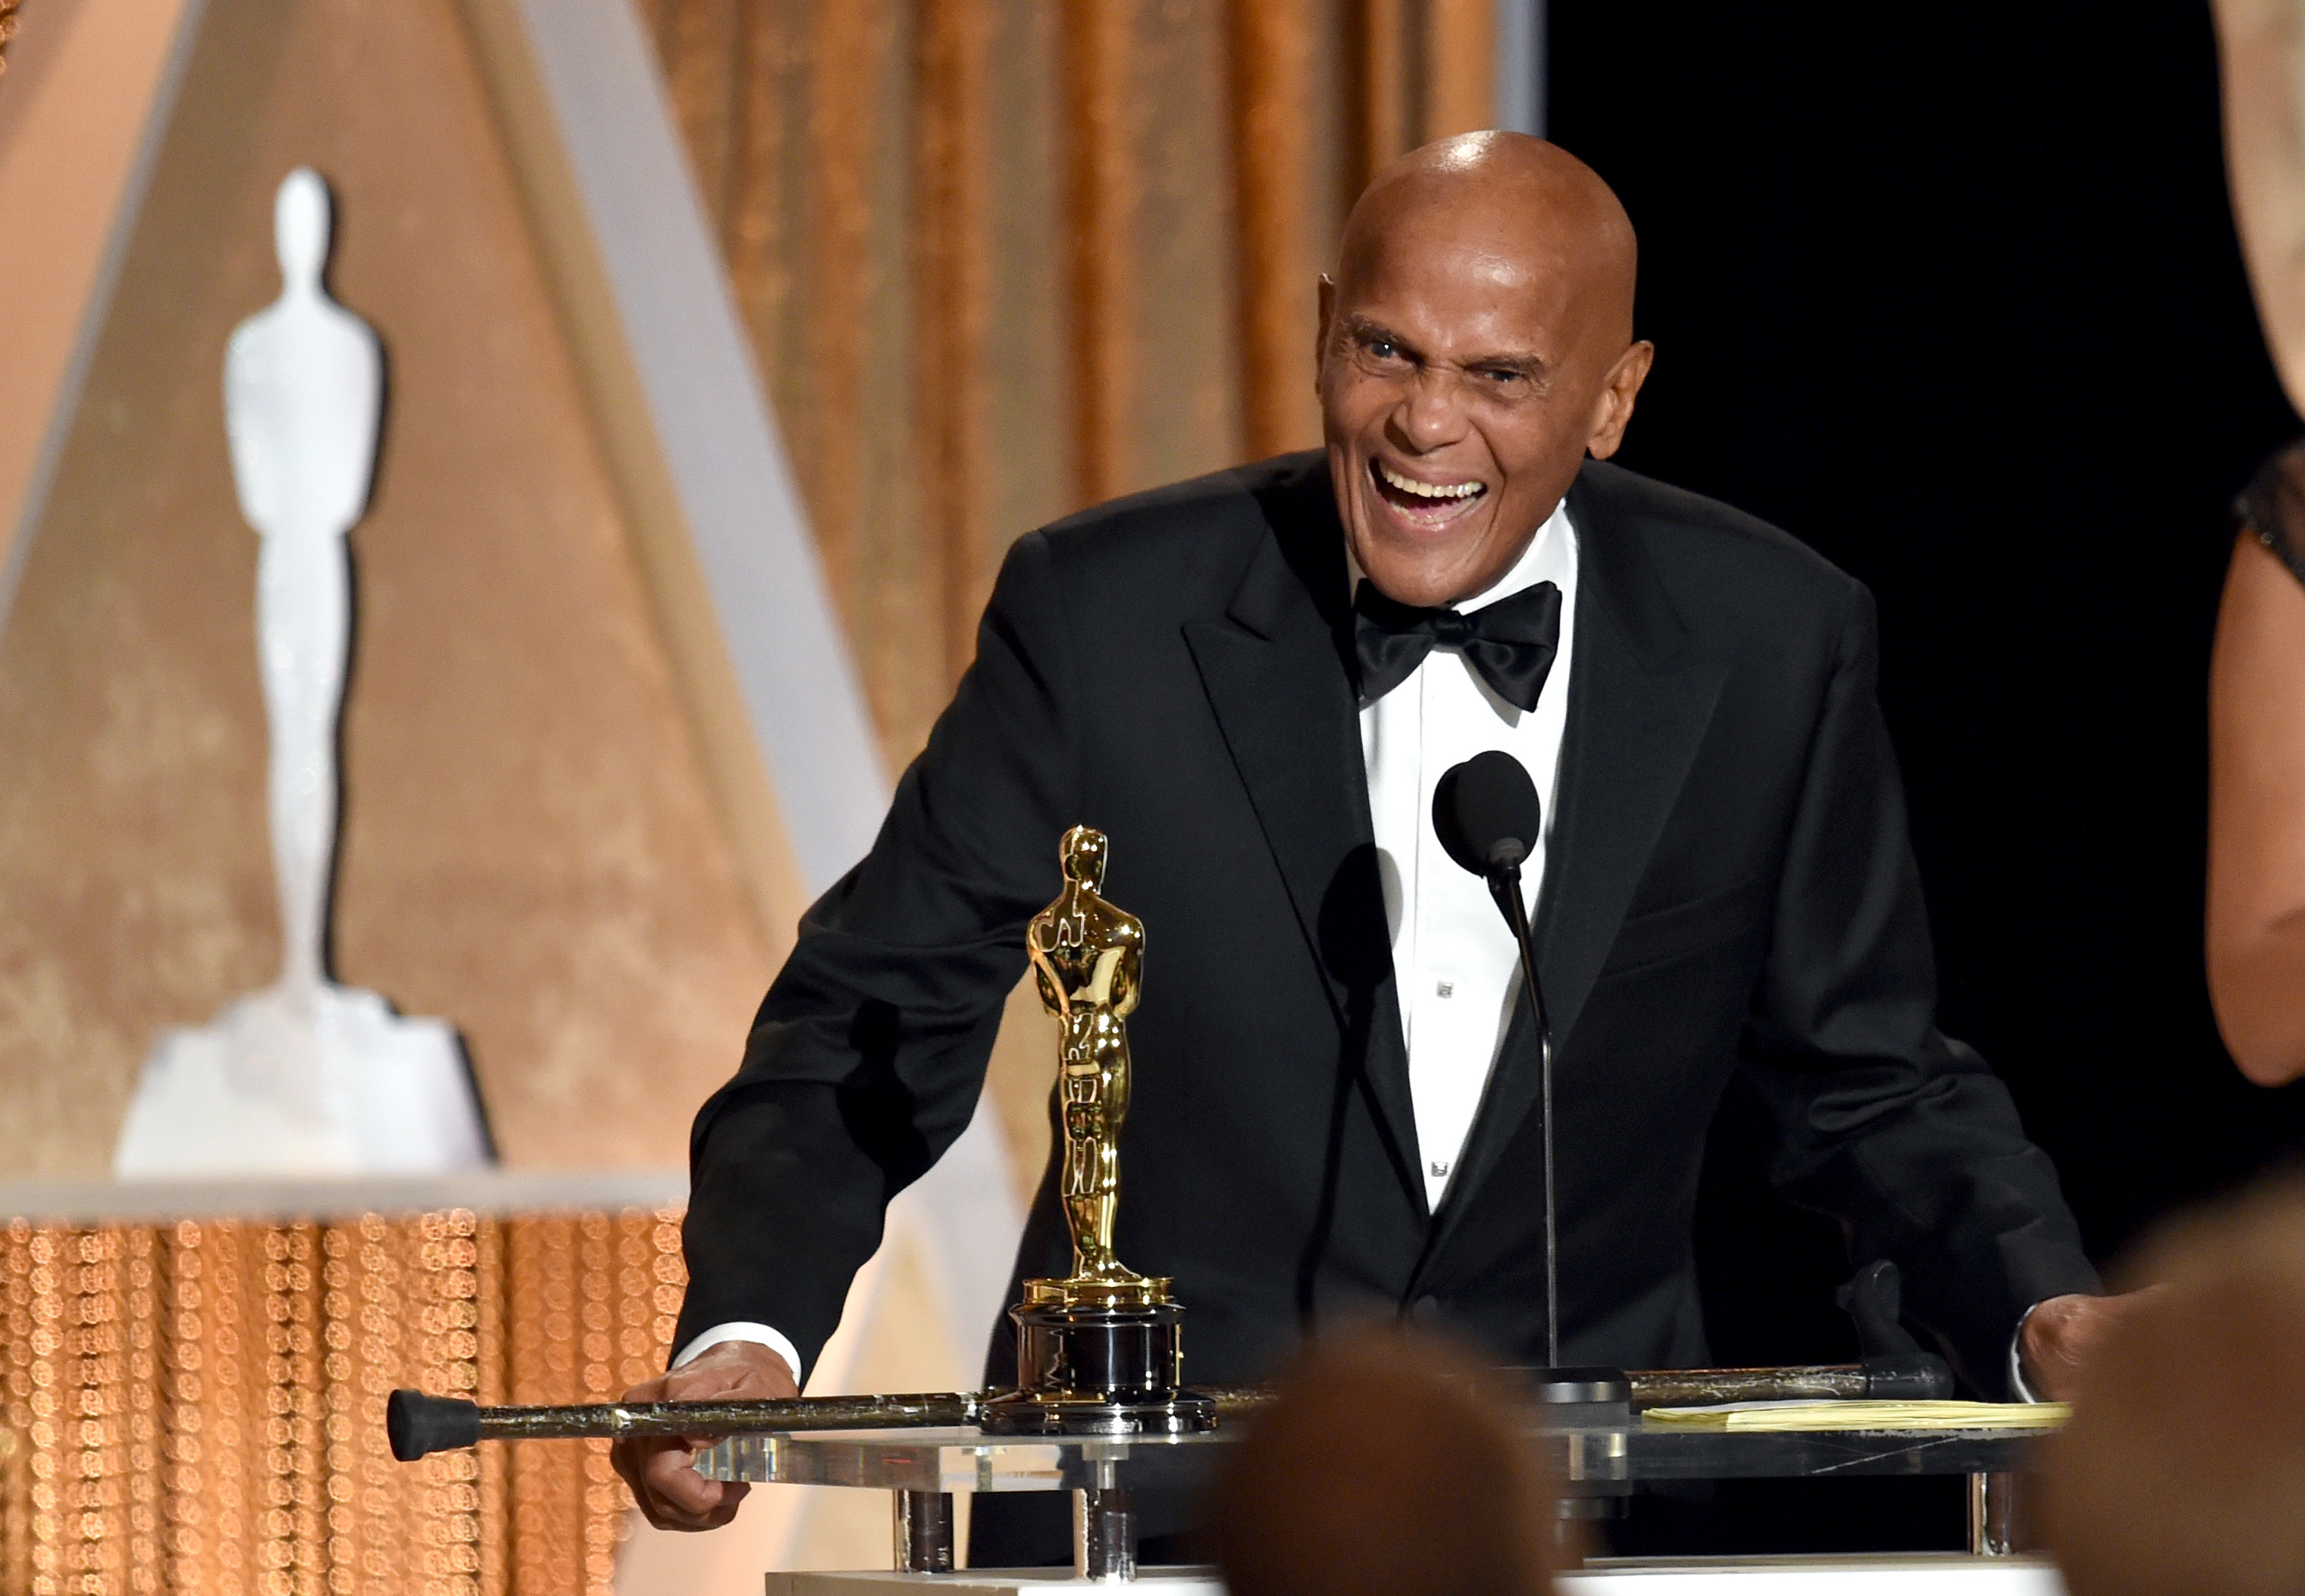 Harry Belafonte accepting an award on November 8, 2014 in Hollywood, California. | Source: Getty Images